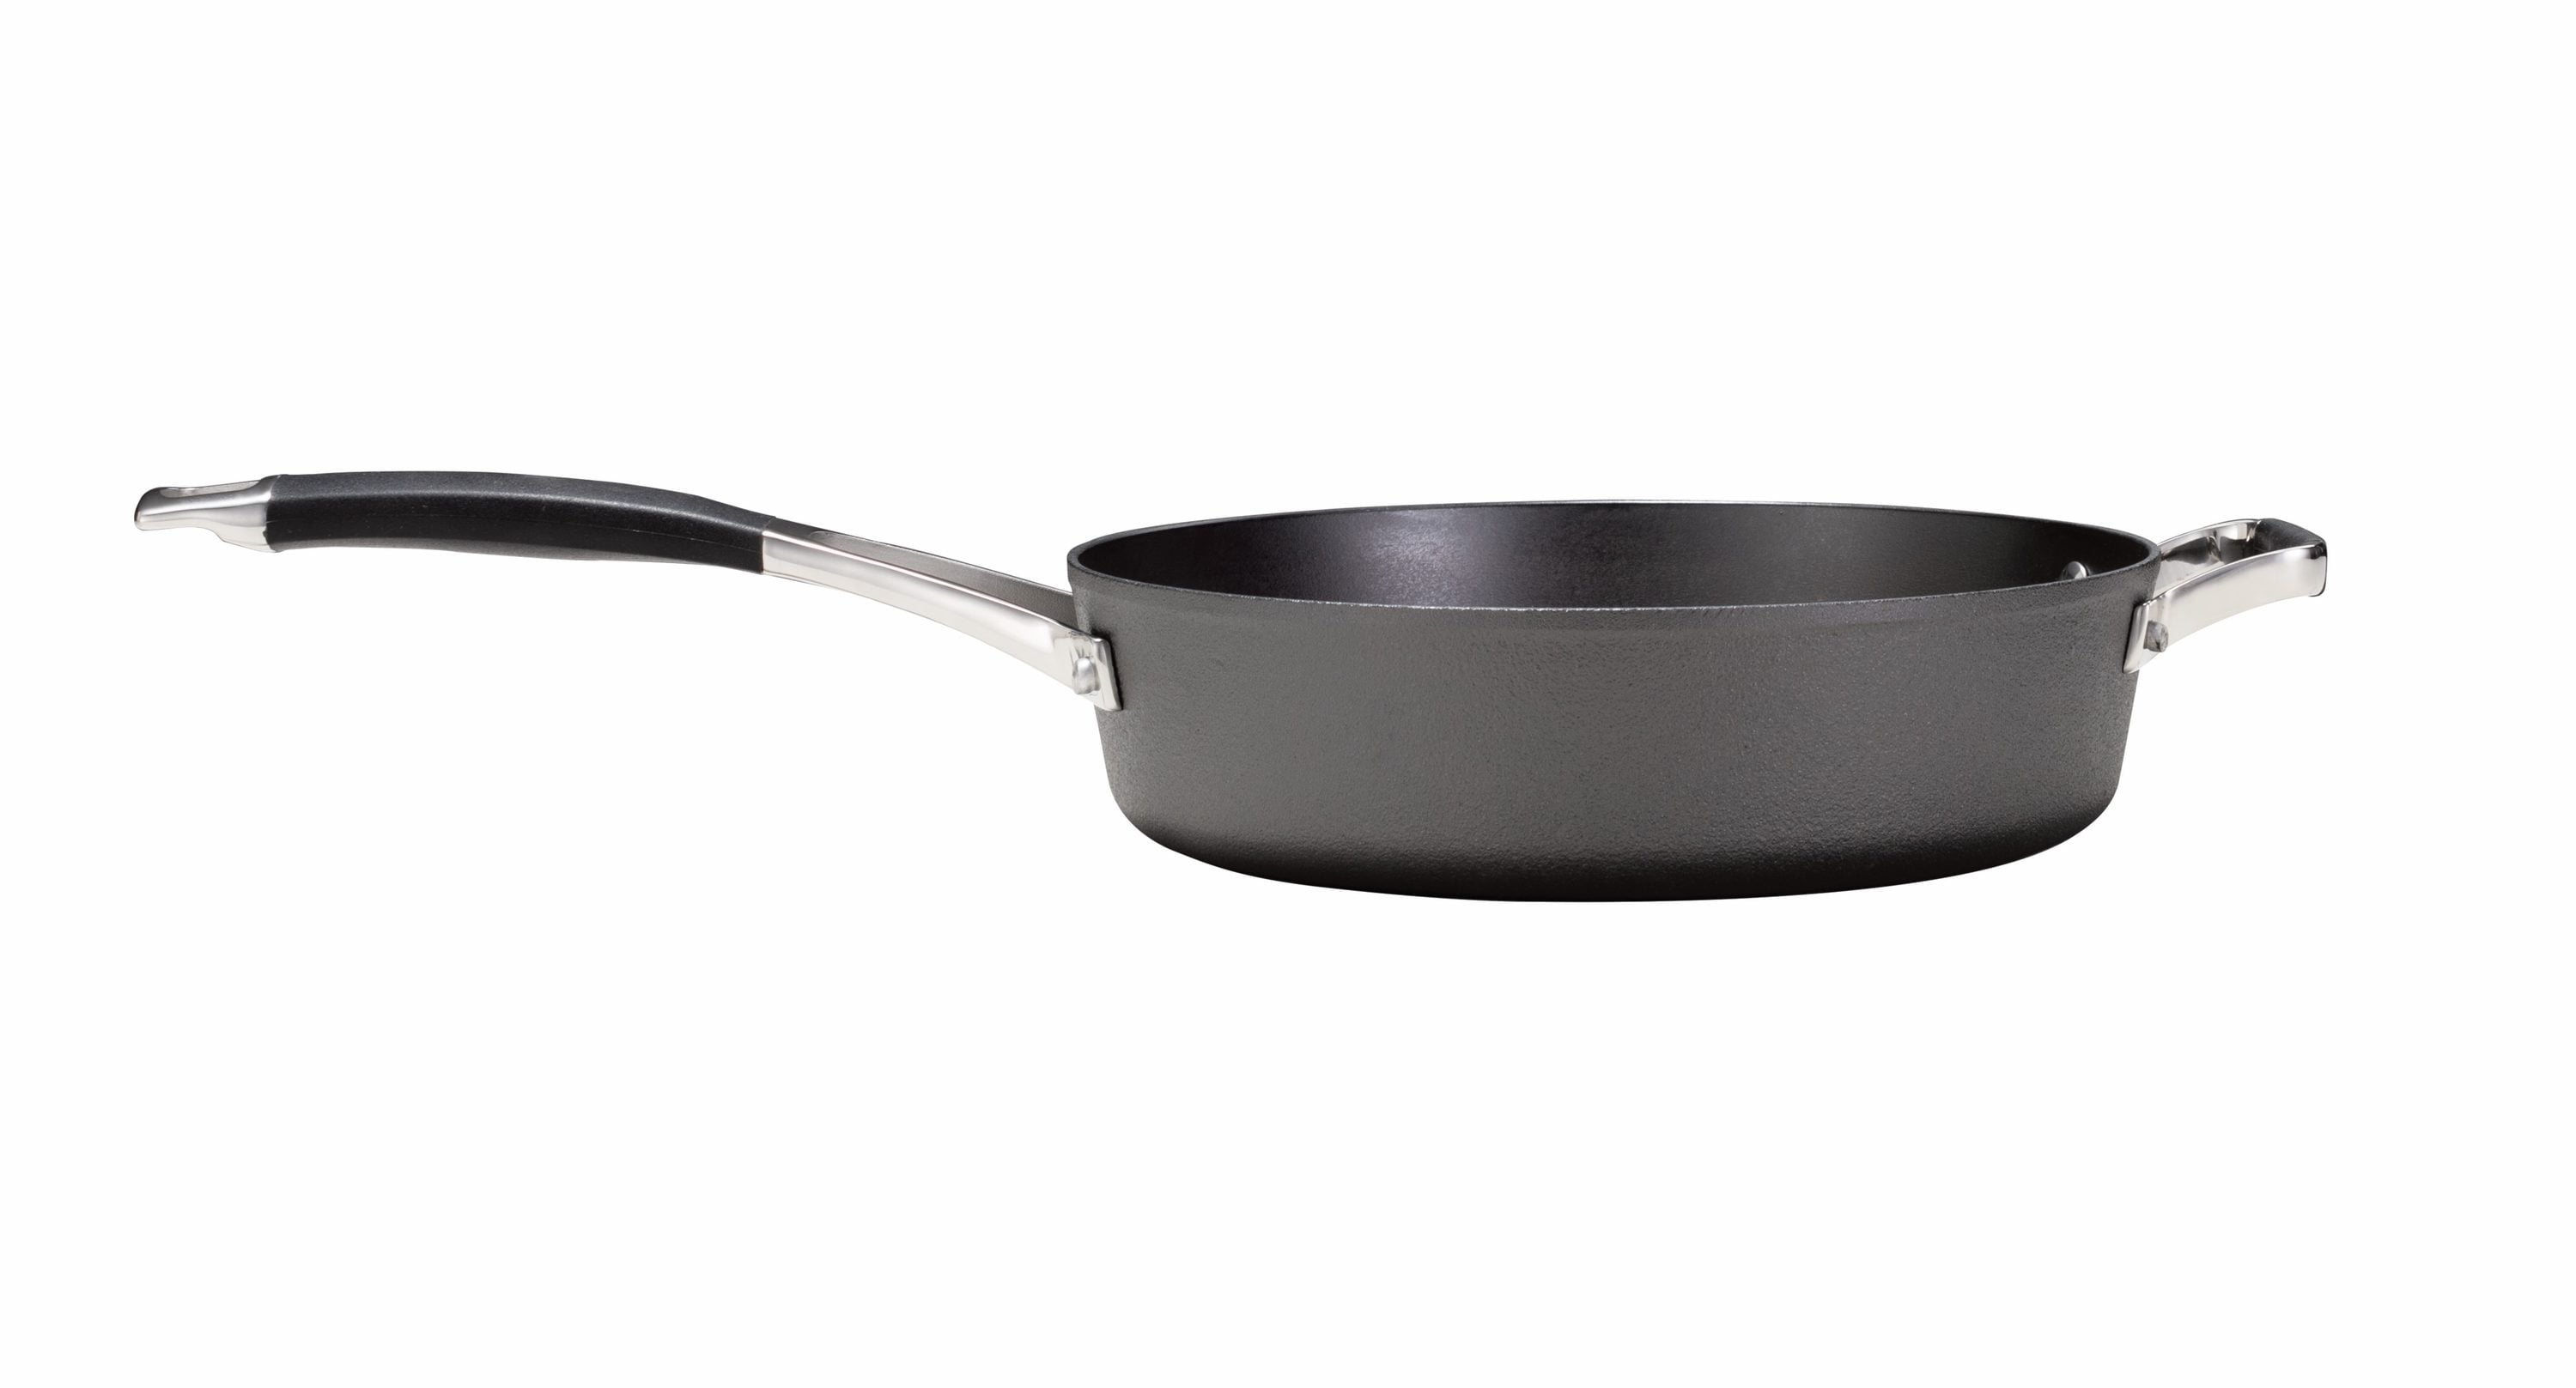 Camp Chef - 10in Cast Iron Skillet